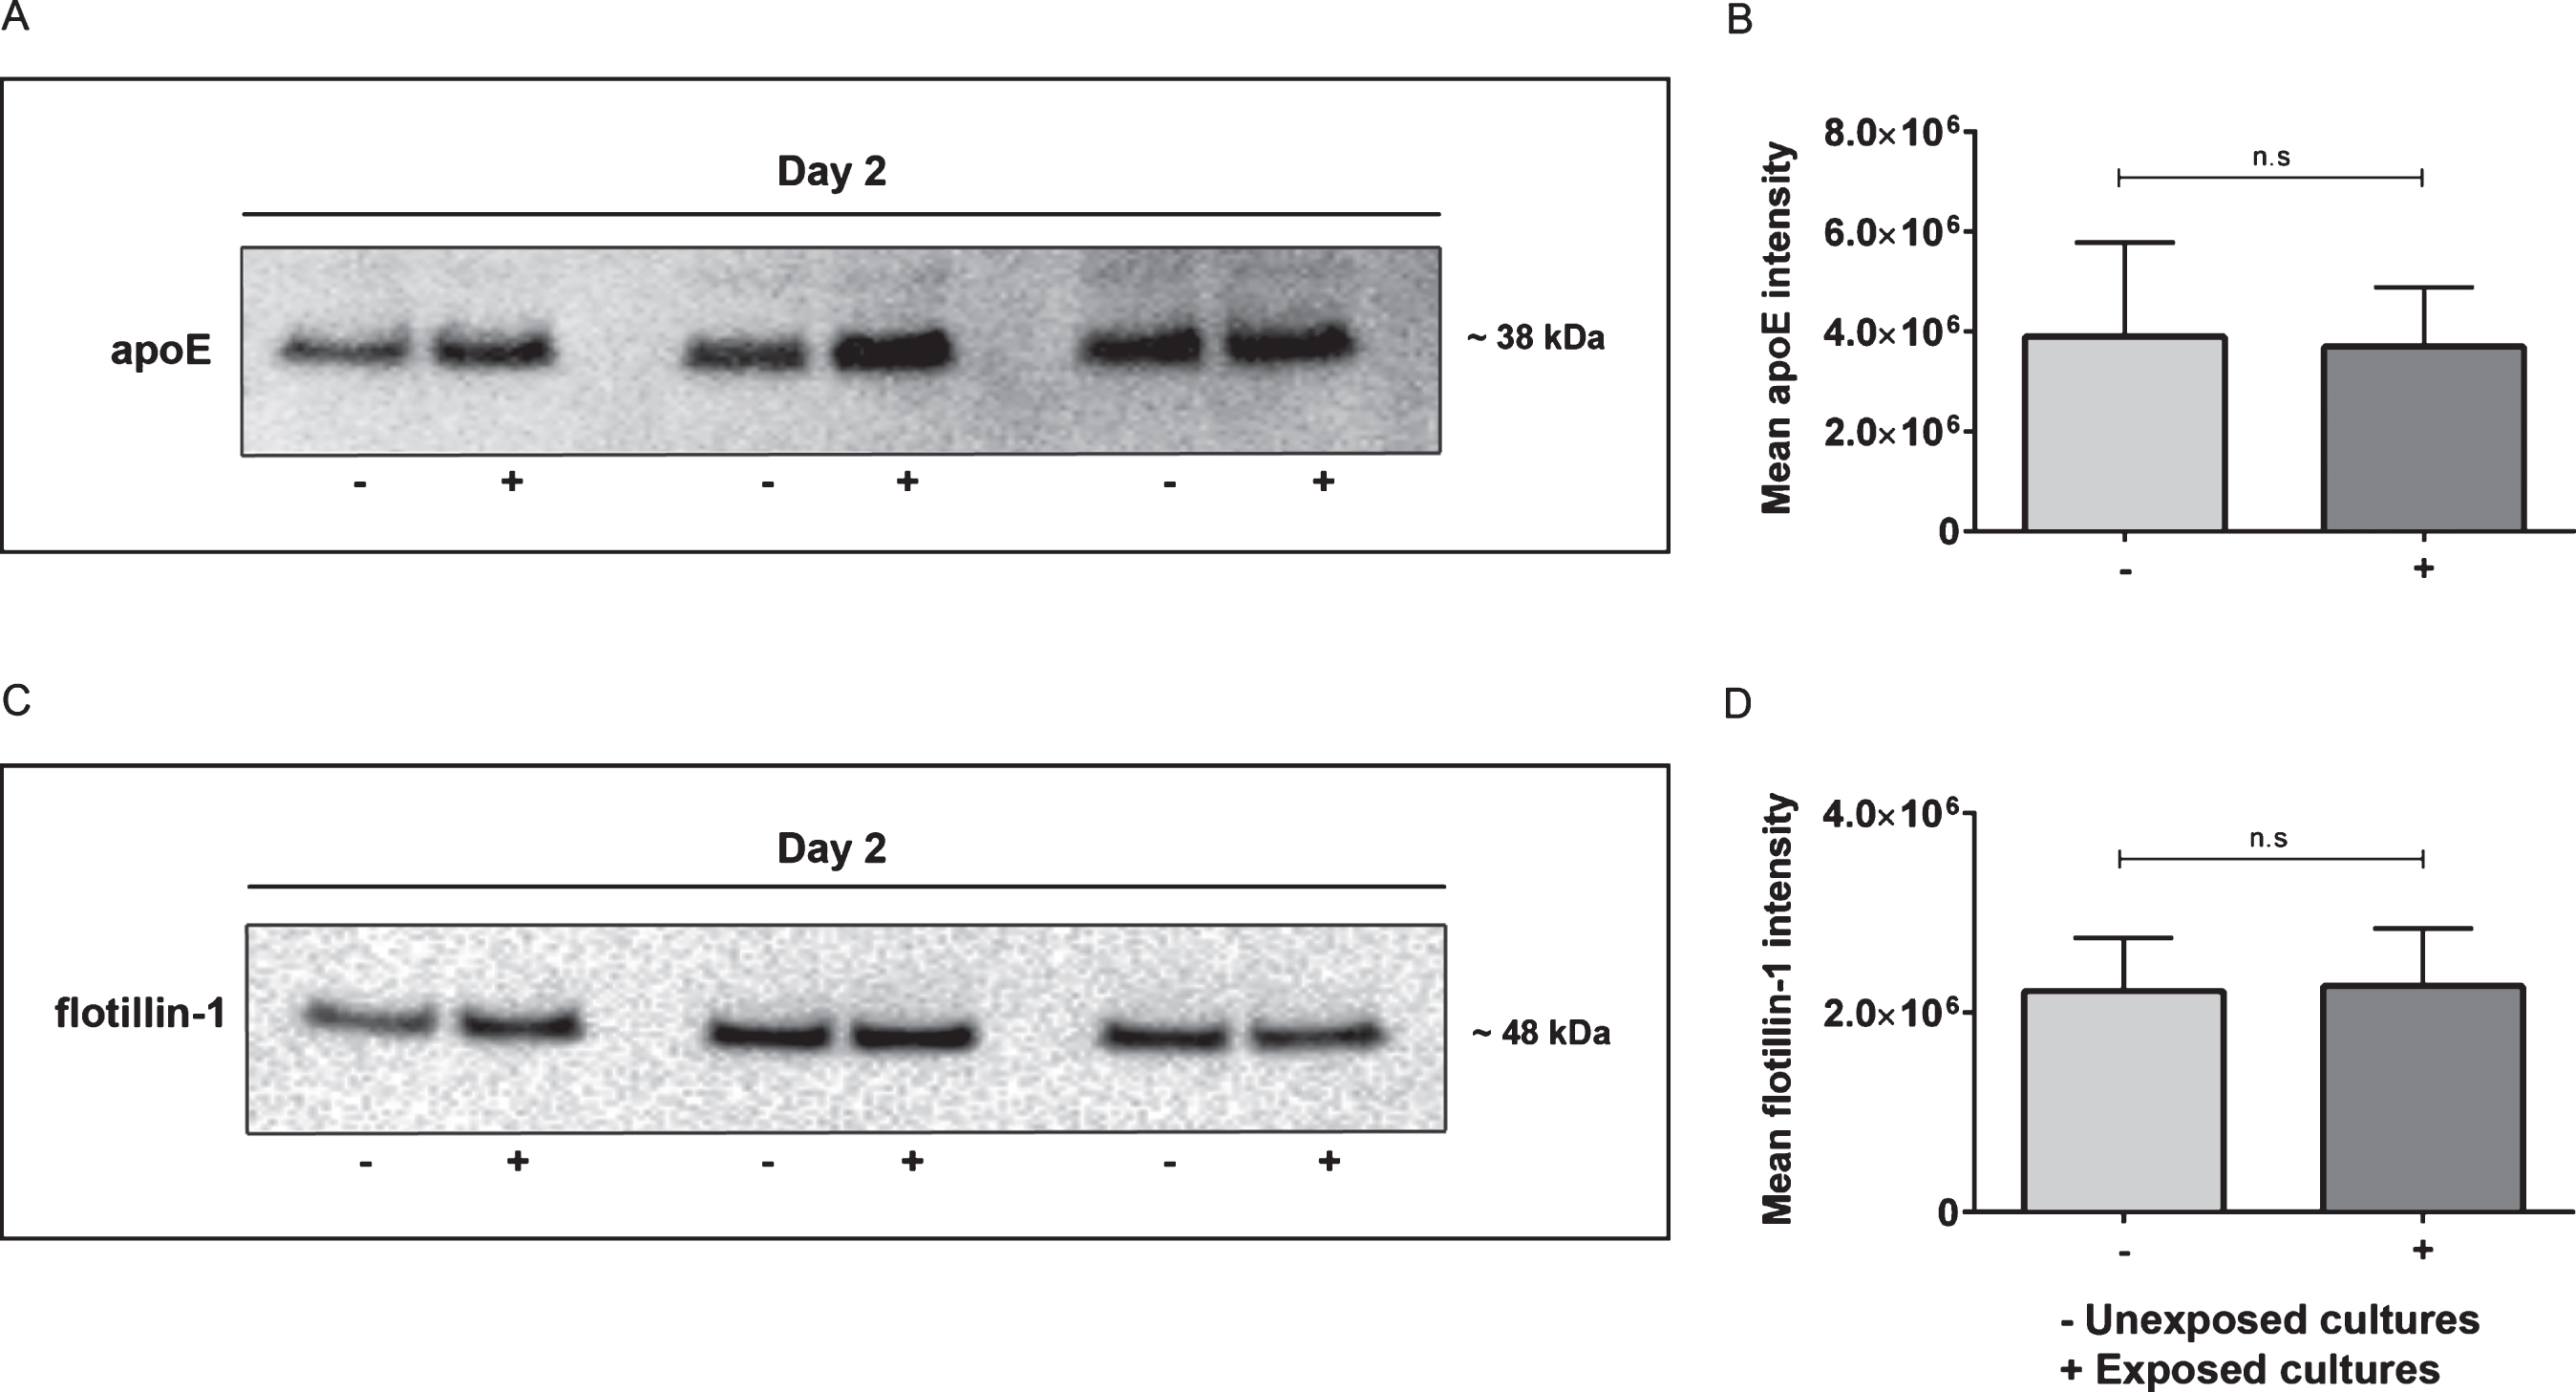 Intracellular apoE levels are similar in Aβ42 protofibril exposed cells and unexposed cells. Western blot analysis of cell lysates from day 2 verified that there was no difference in intracellular apoE expression in Aβ42 protofibril exposed cultures and unexposed cultures (A,B). The mean apoE intensity was 38.9E5±18.9E5 in unexposed samples and 37.0E5±11.9E5 in Aβ42 protofibril exposed samples. Flotillin-1 levels also remained unchanged in Aβ42 protofibril exposed cells, compared to untreated cells (C,D). The mean flotillin-1 intensity was 22.2E5±5.3E5 in unexposed samples and 22.7E5±5.8E5 in Aβ42 protofibril exposed samples. Six independent cell culture experiments were analyzed for each of the two proteins and the data was examined with Mann-Whitney U-test. Western blot analysis from three independent experiments are illustrated in A and C.